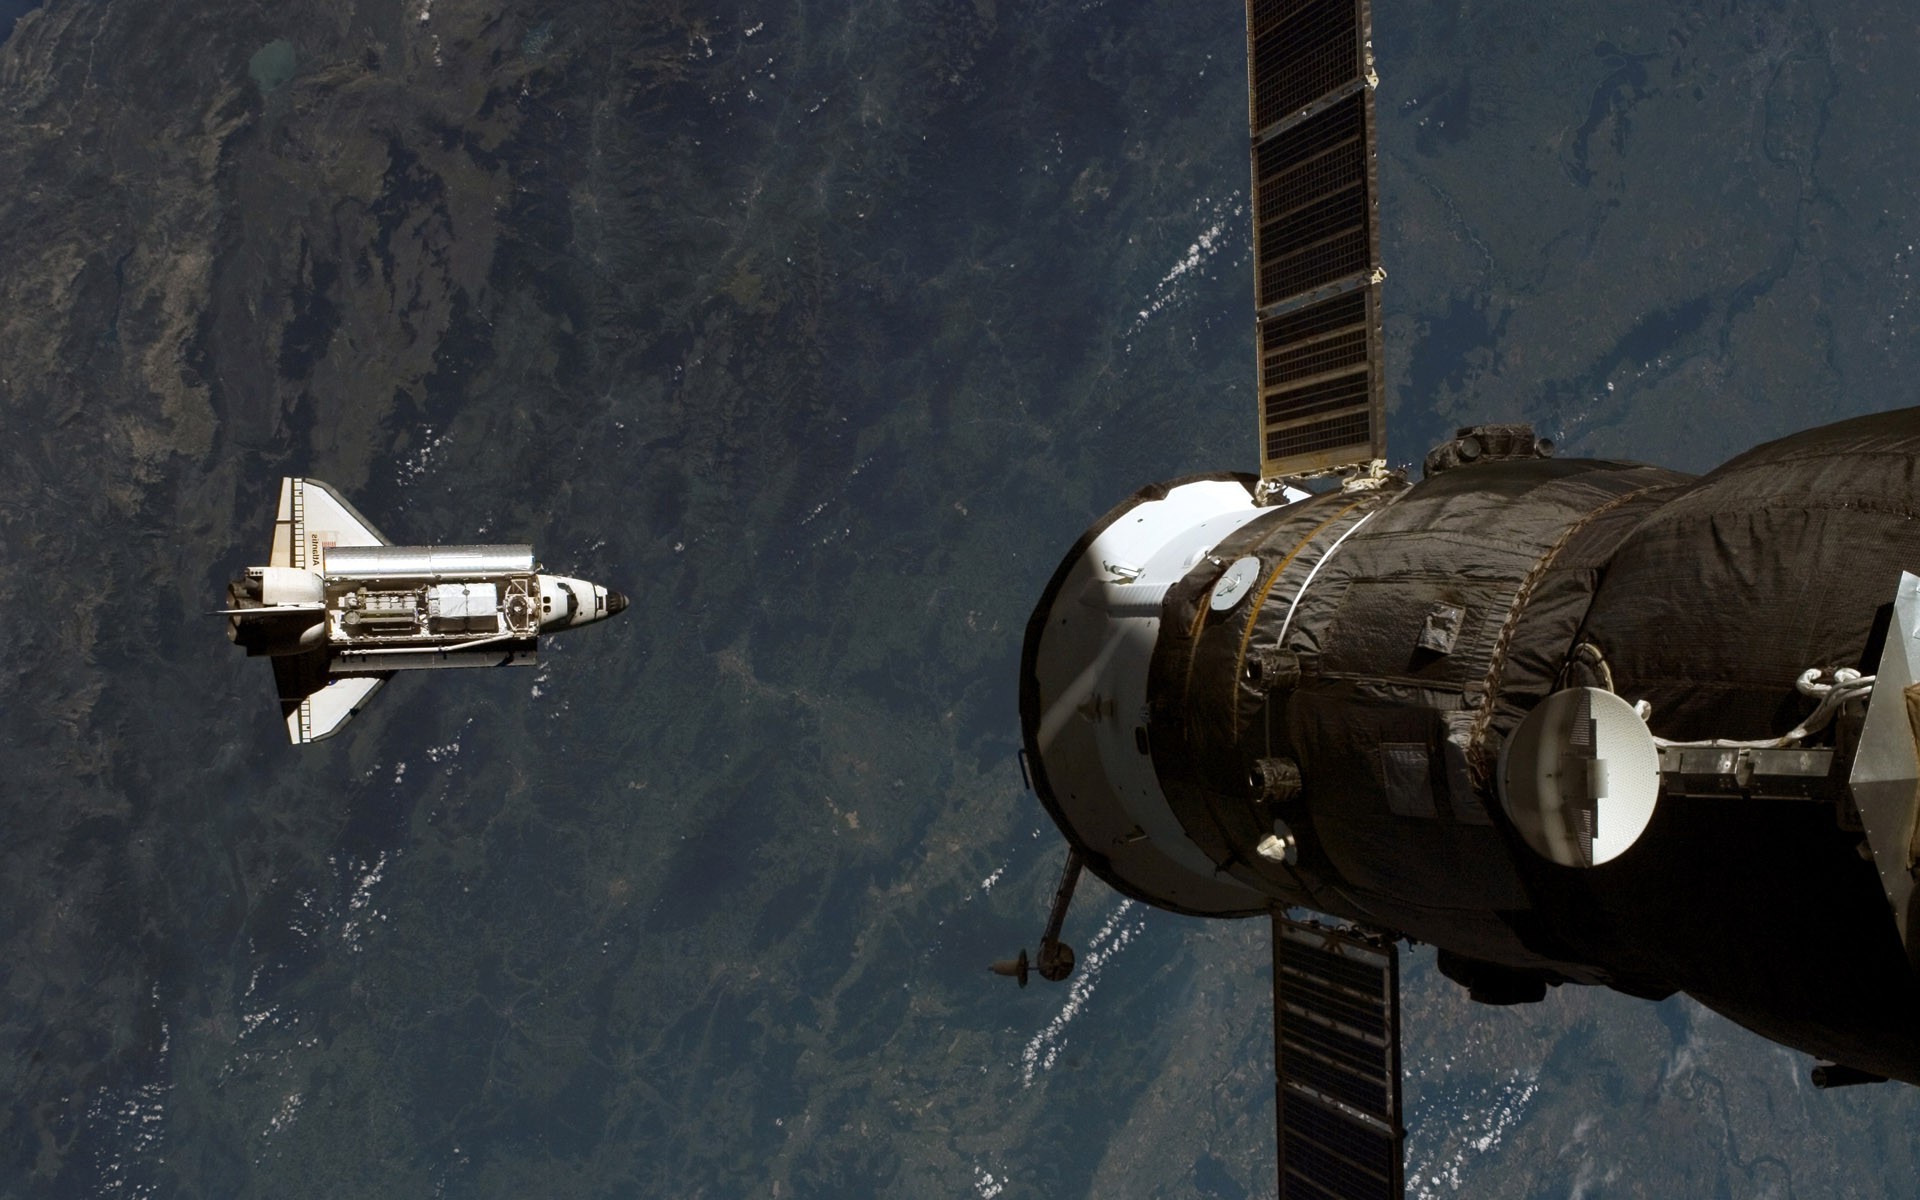 photography, Mir Space Station, Mir, Space Shuttle Atlantis, Space, Space Shuttle, Space Station, NASA, Earth Wallpaper